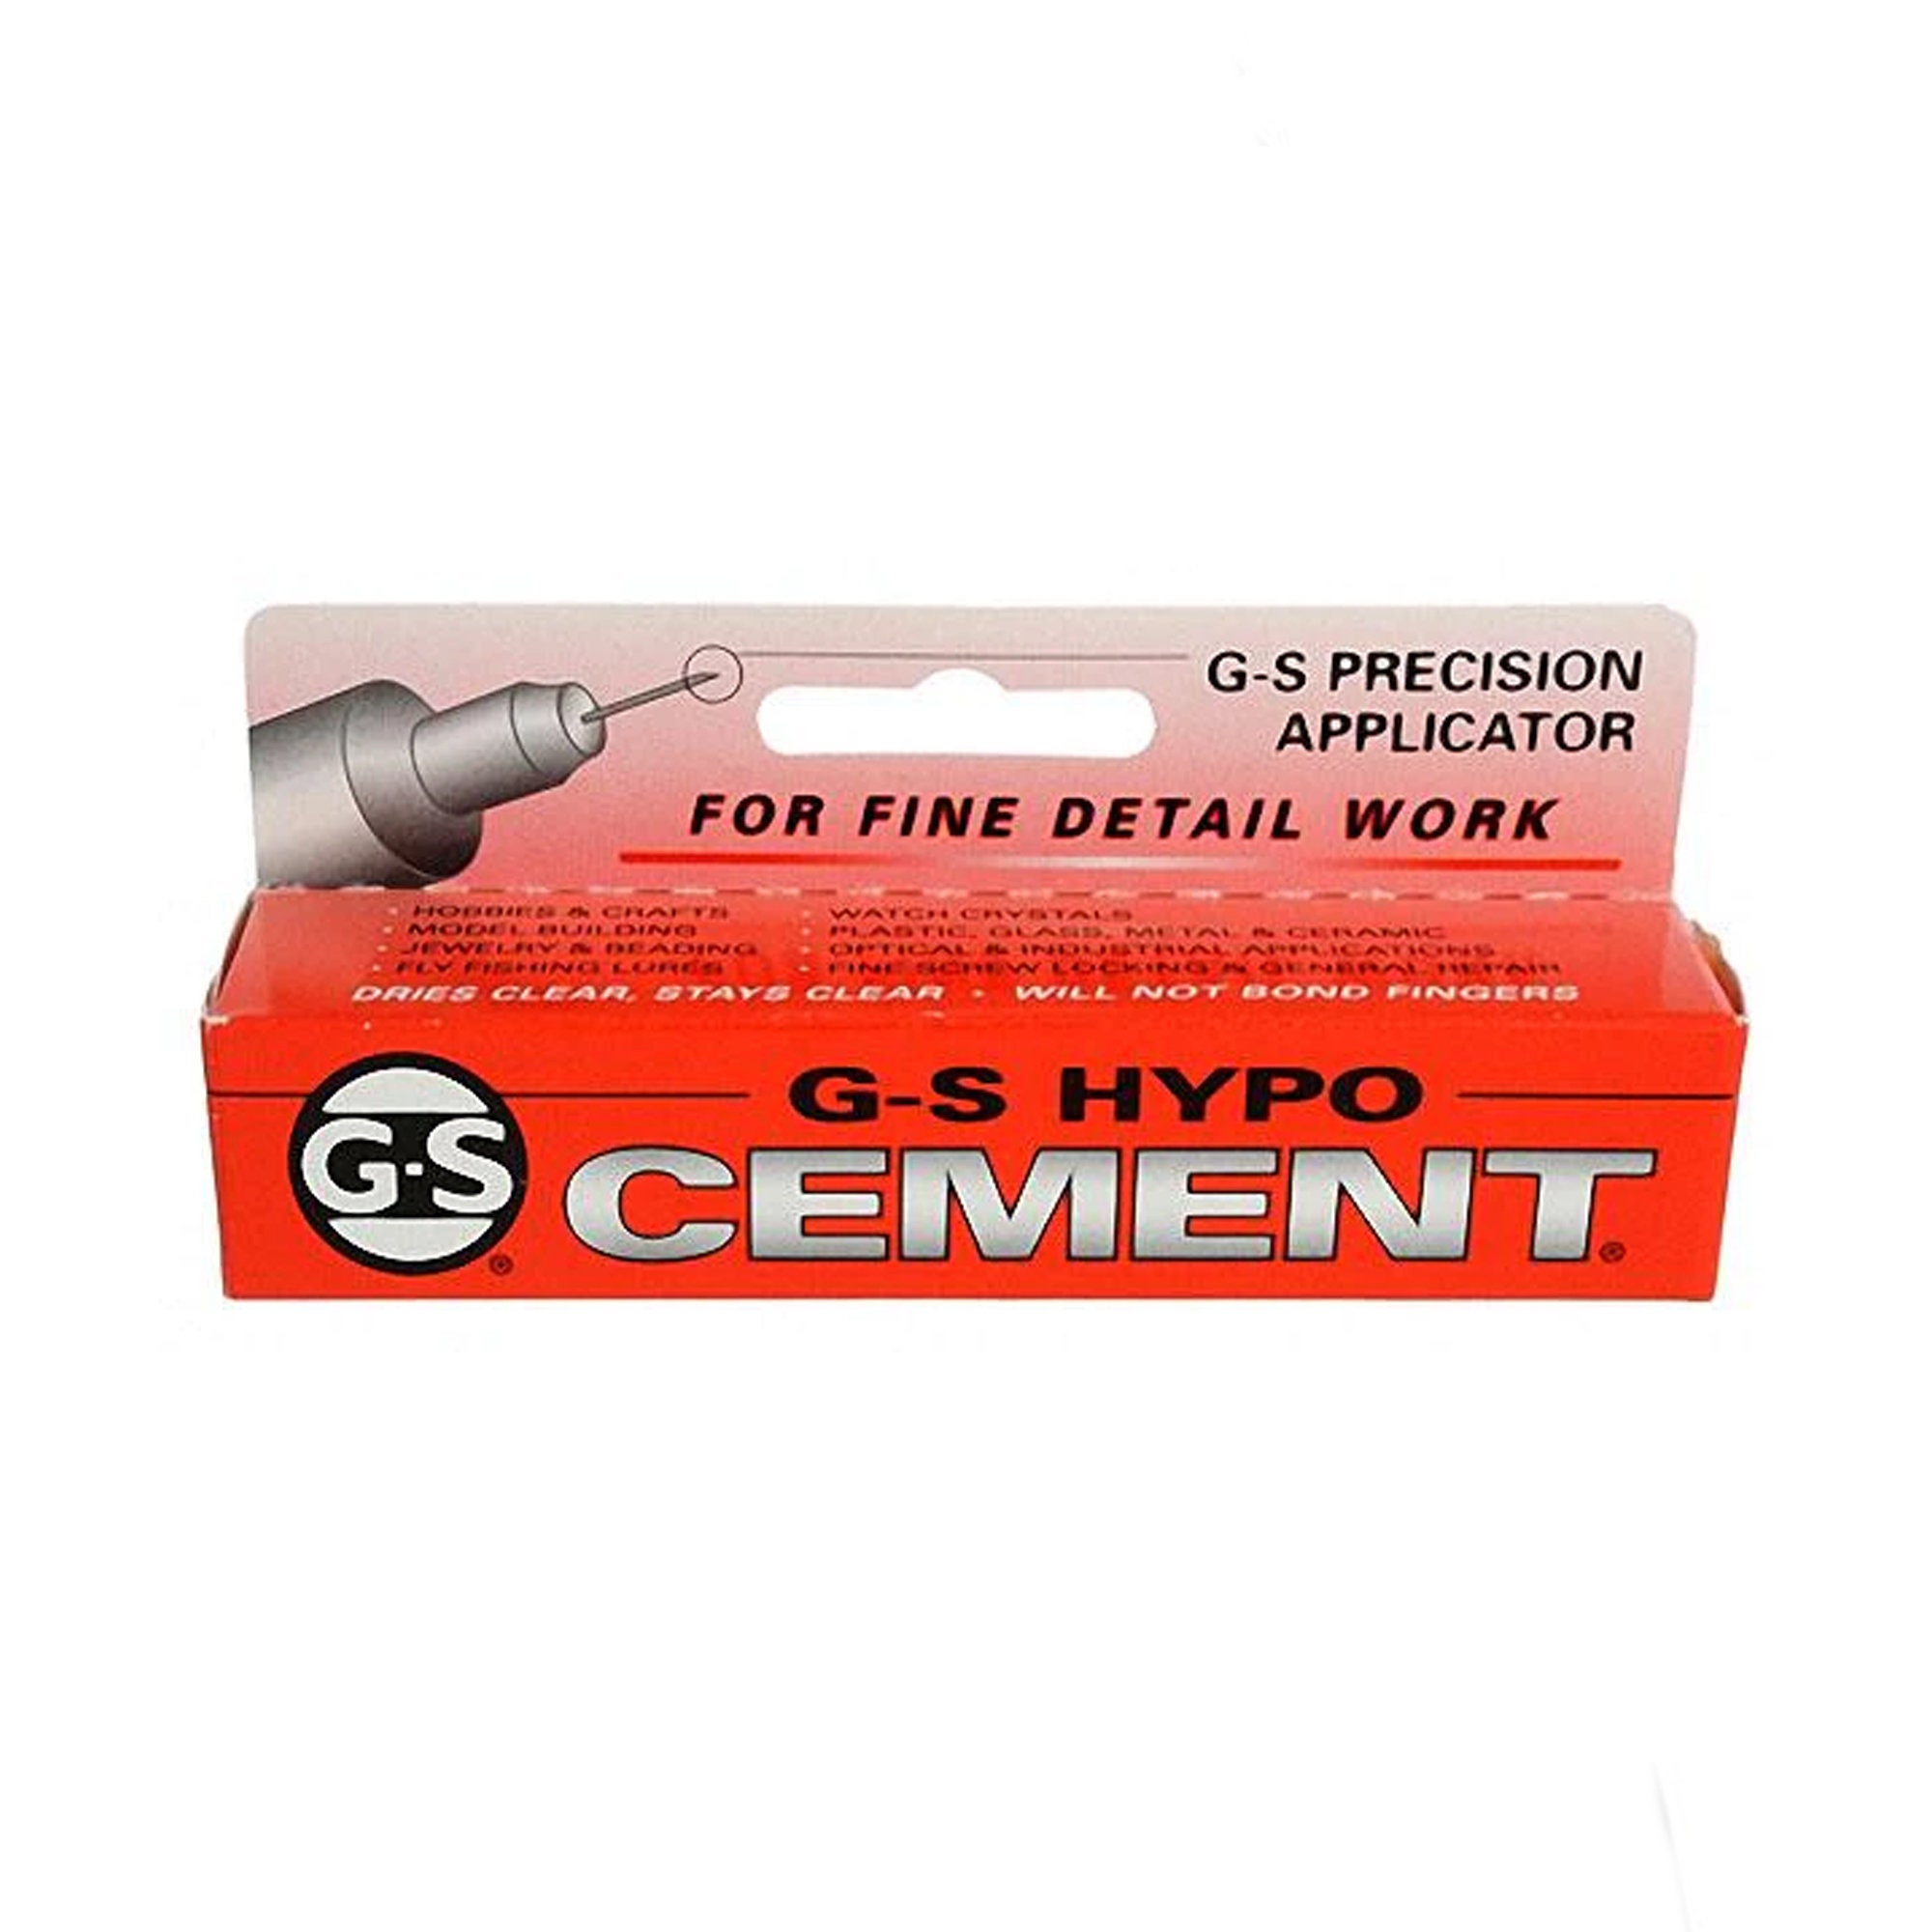  GS Supplies G-S Hypo Cement, 1 Count (Pack of 1